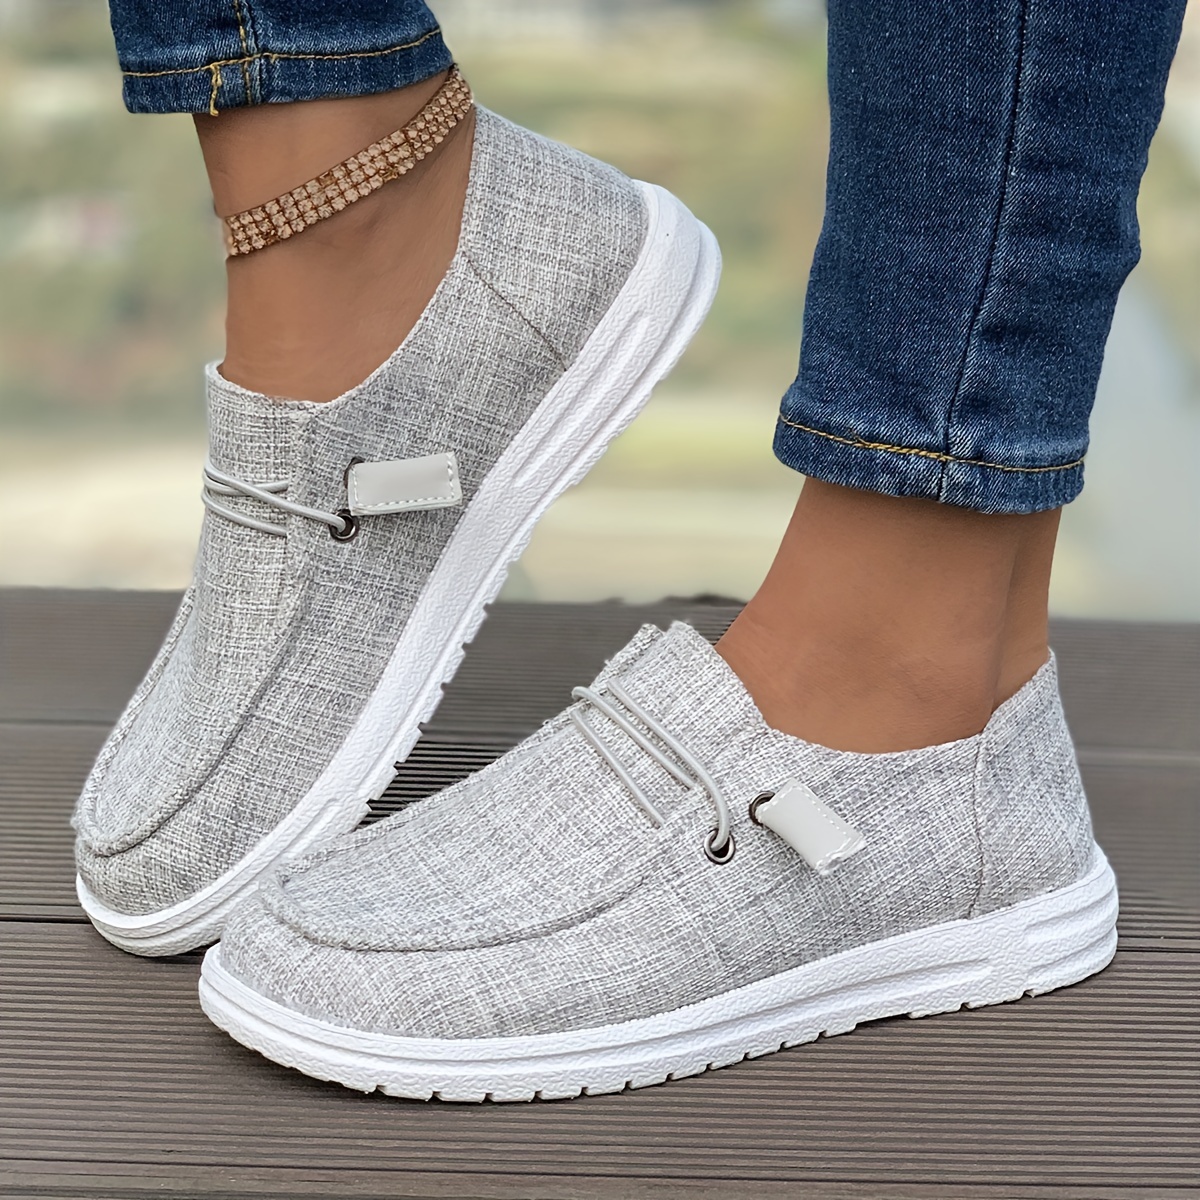 Hey Dude Womens Wendy Solid Washable Slip On Casual Shoes